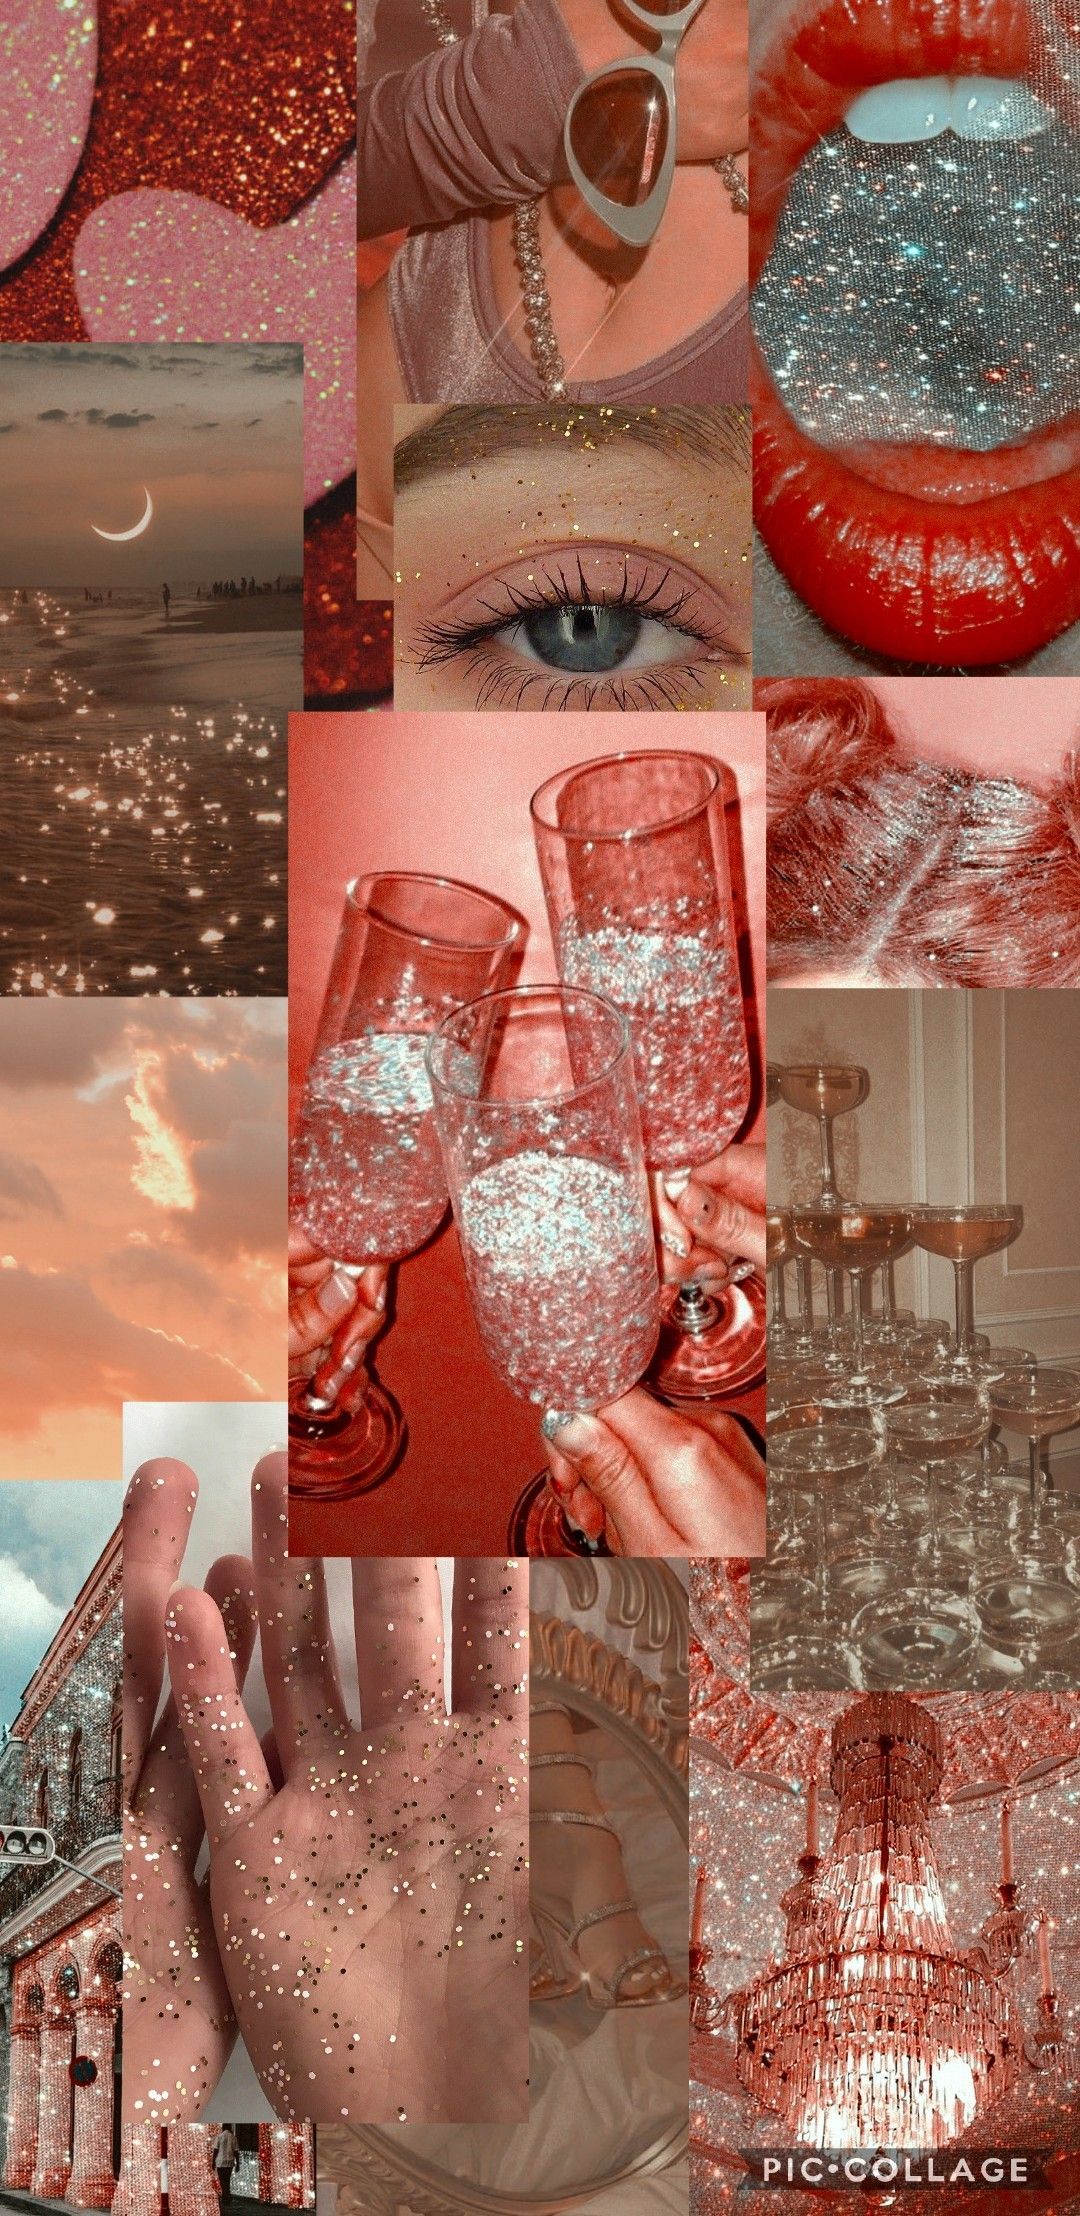 A collage of pictures with different colors - Champagne